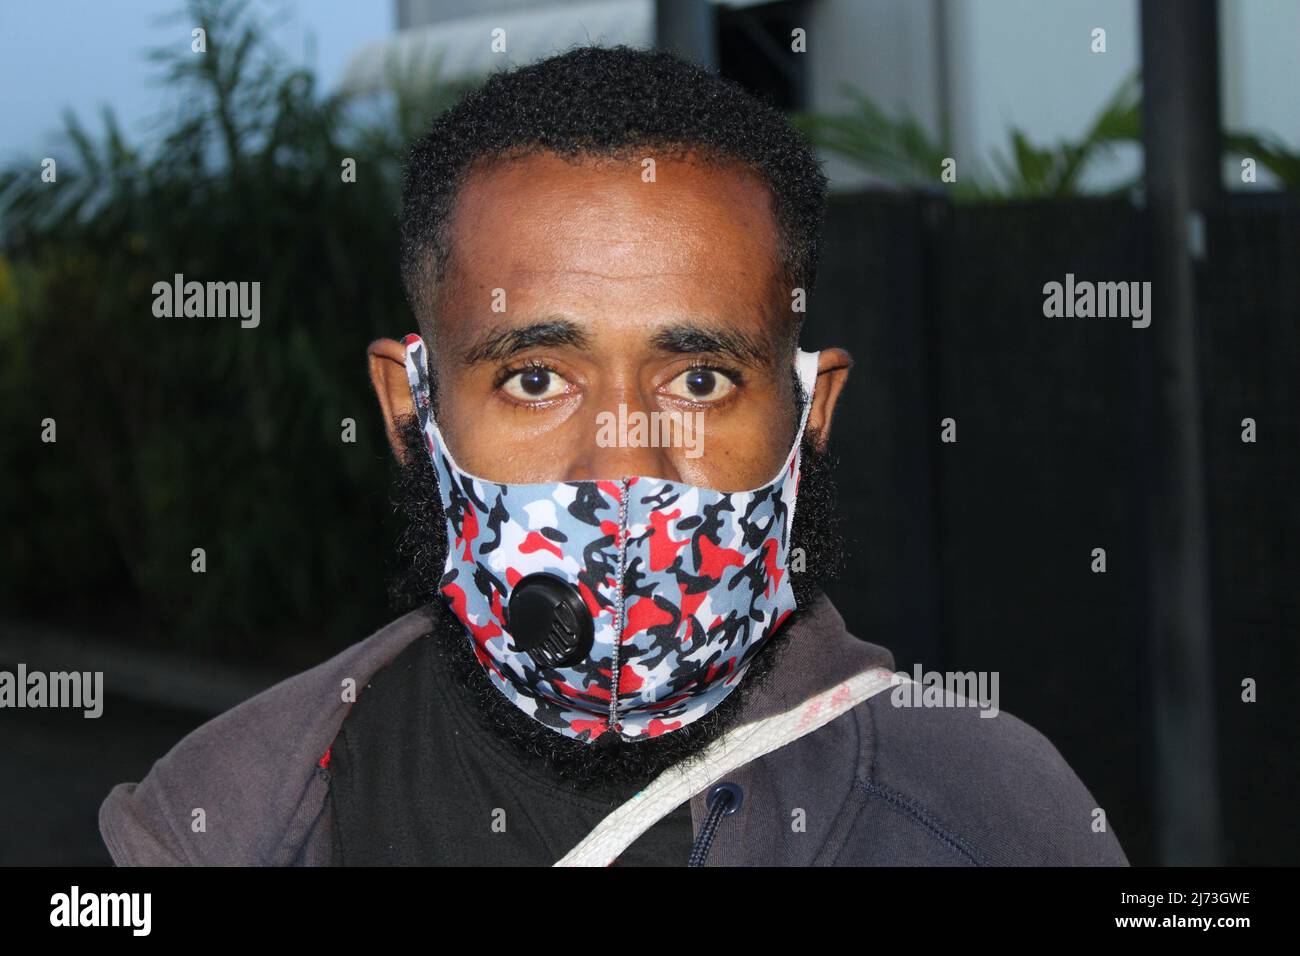 A Papua New Guinean youth wearing a face mask at Jackson's International Airport, Papua New Guinea Stock Photo